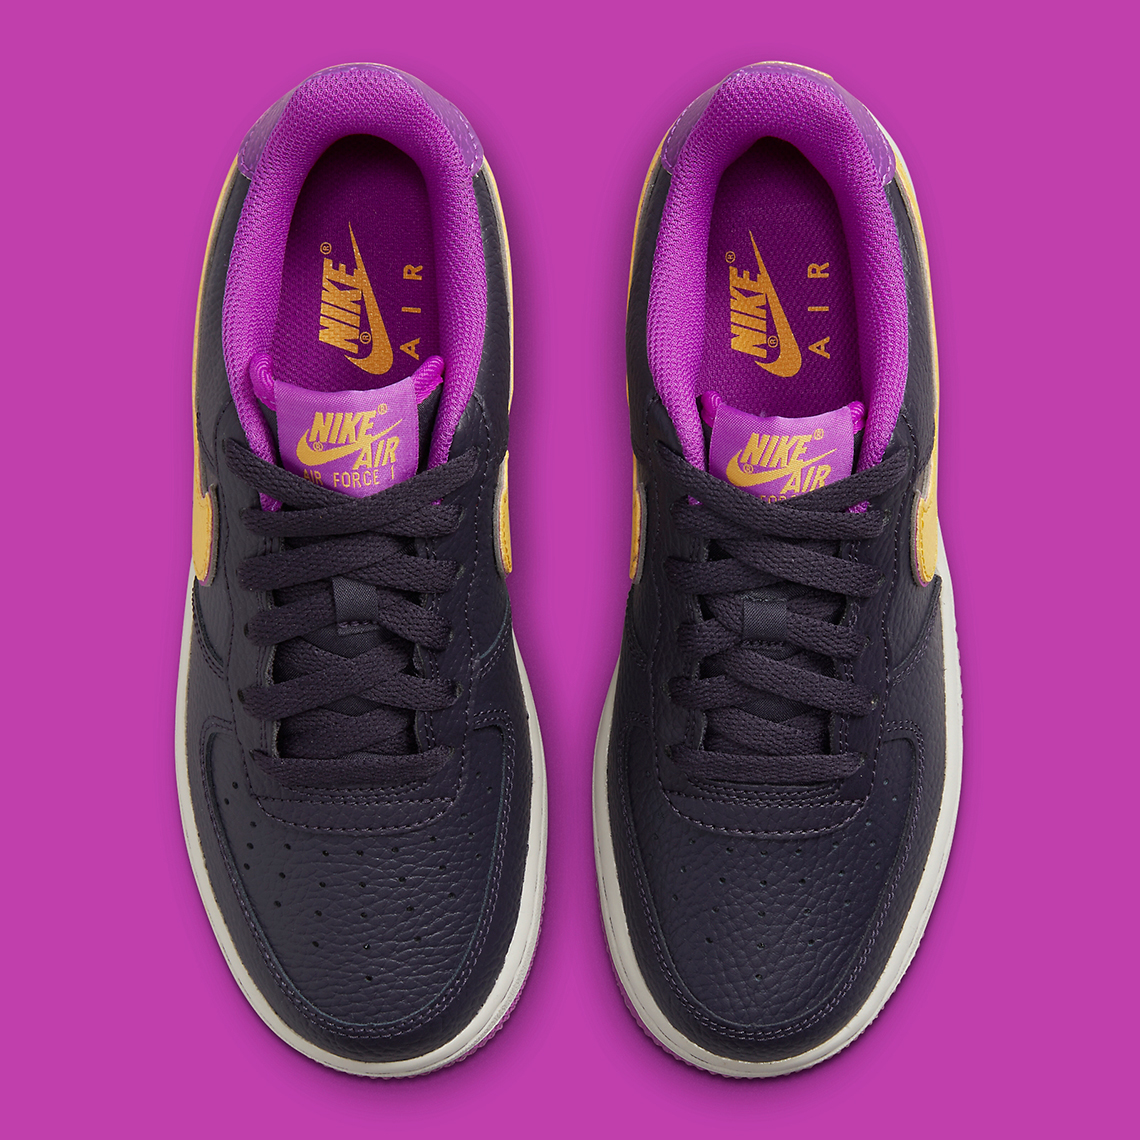 Nike Air Force 1 Low Gs Purple Gold Dx5805 500 3